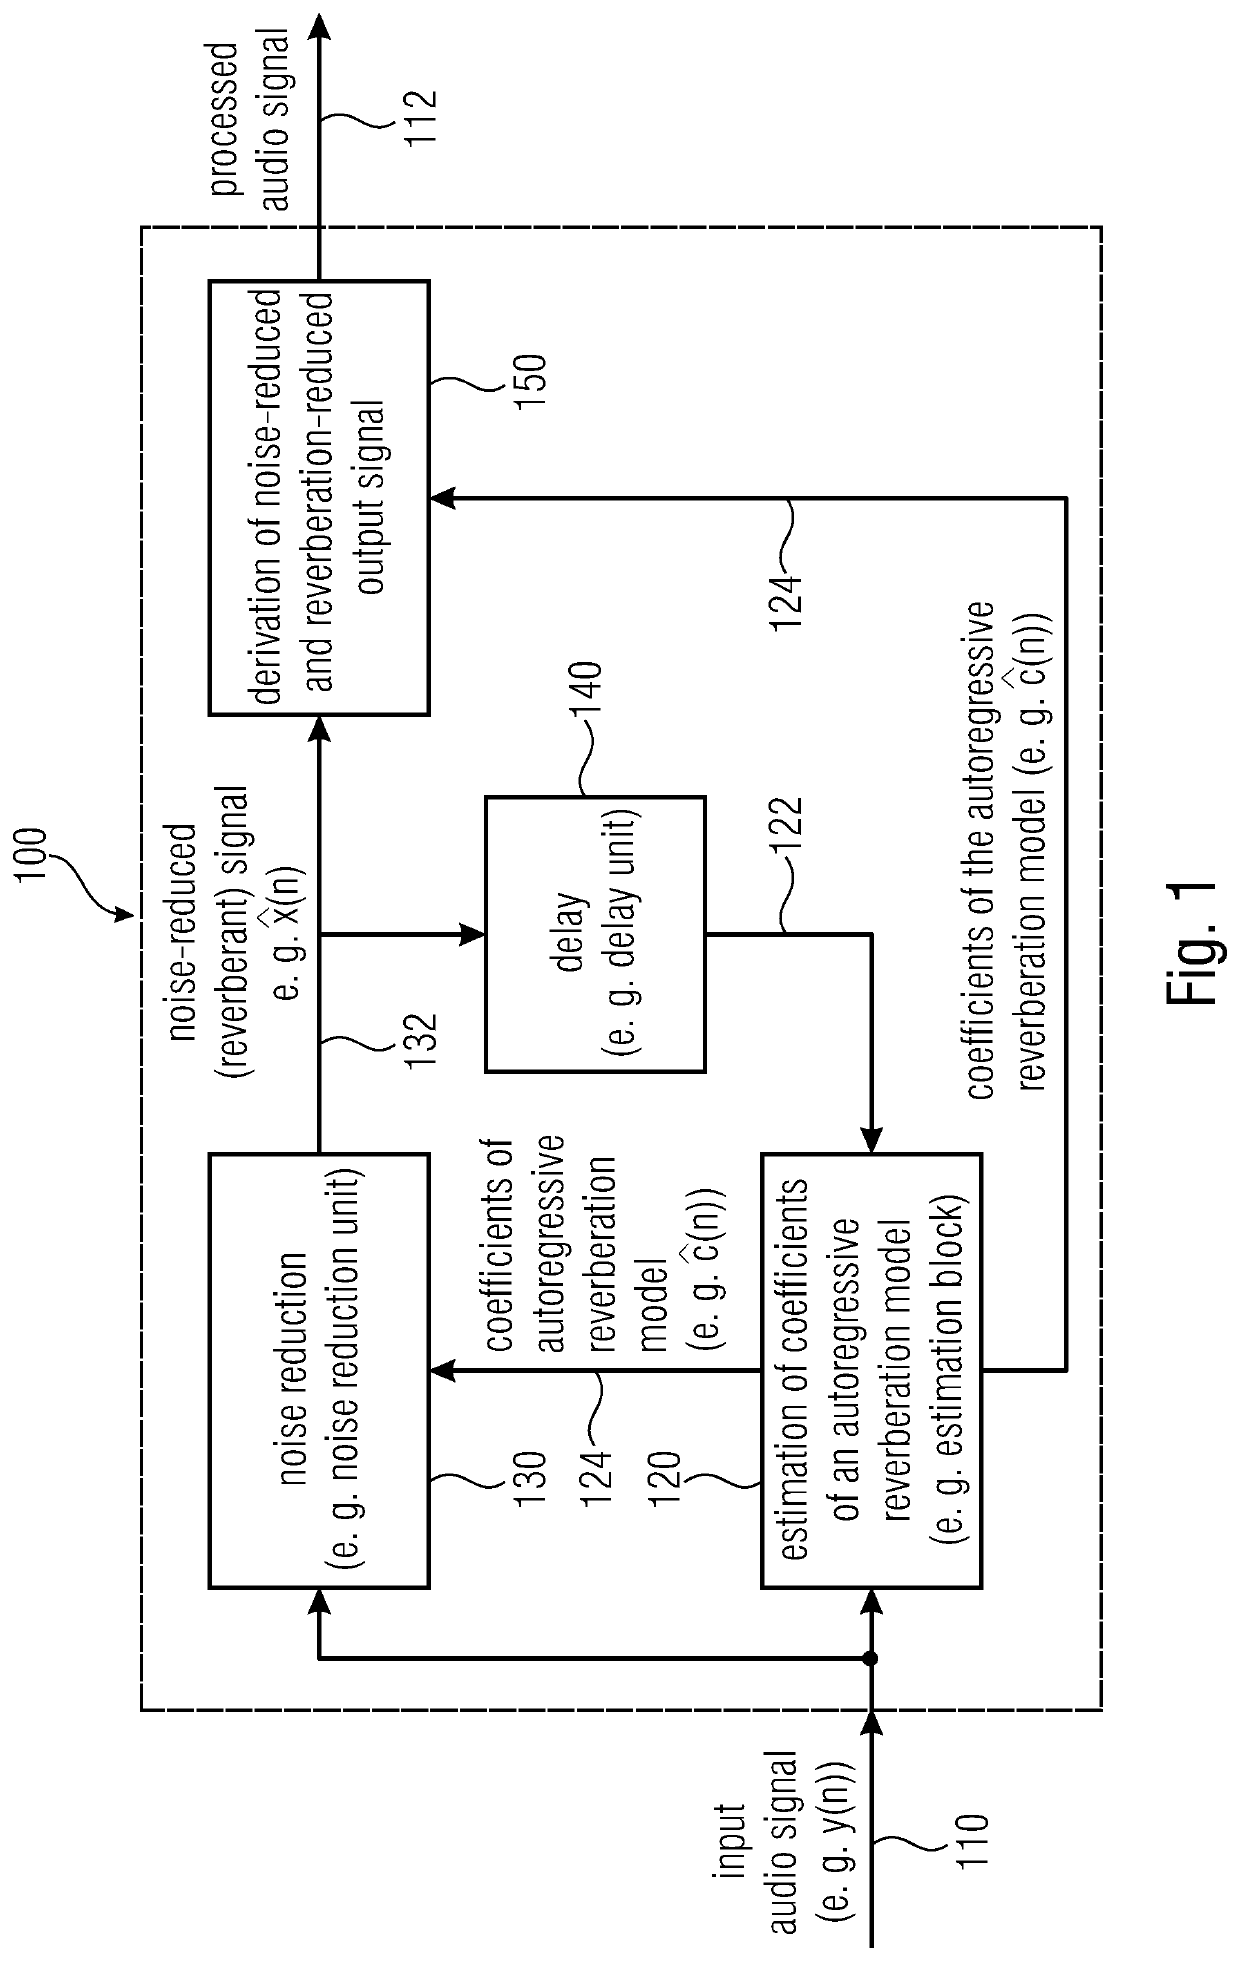 Signal processor and method for providing a processed audio signal reducing noise and reverberation